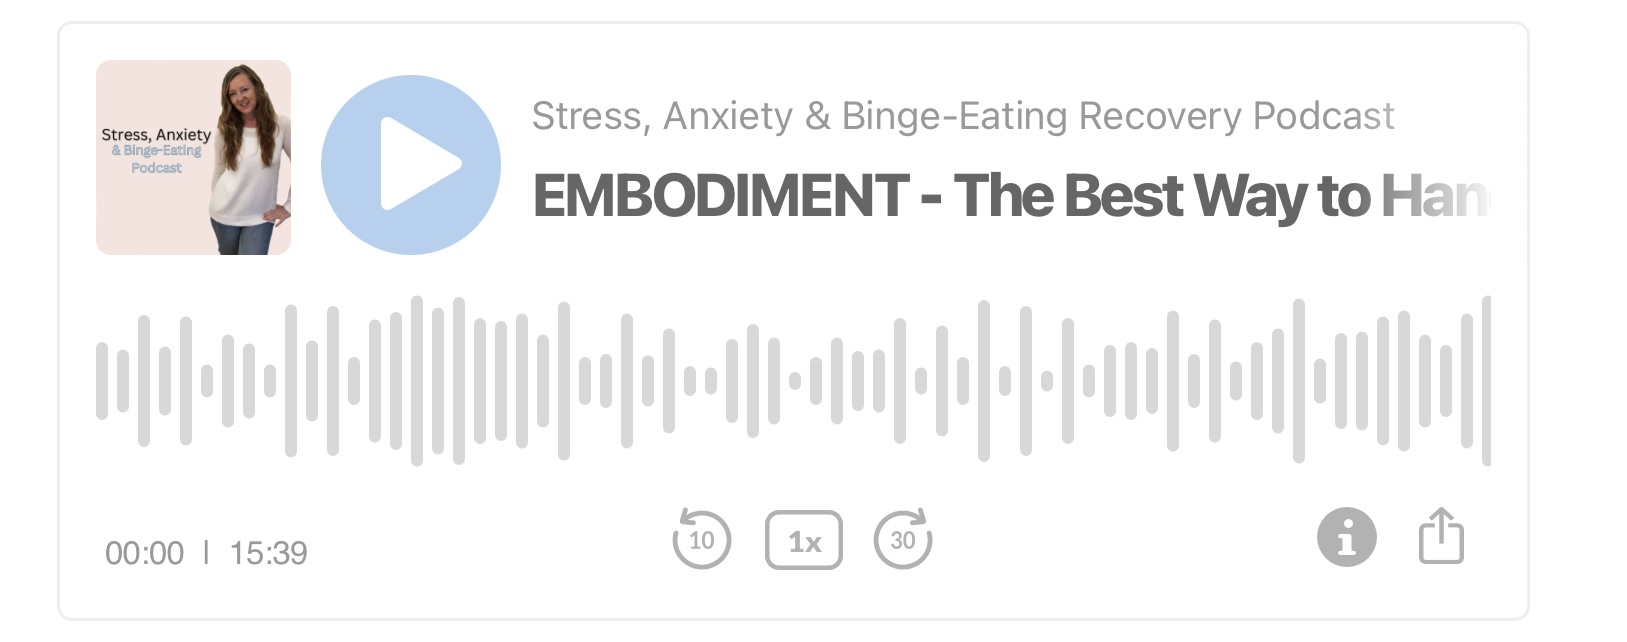 EMBODIMENT - The Best Way to Handle Anxiety Stress and Anxiety Podcasts